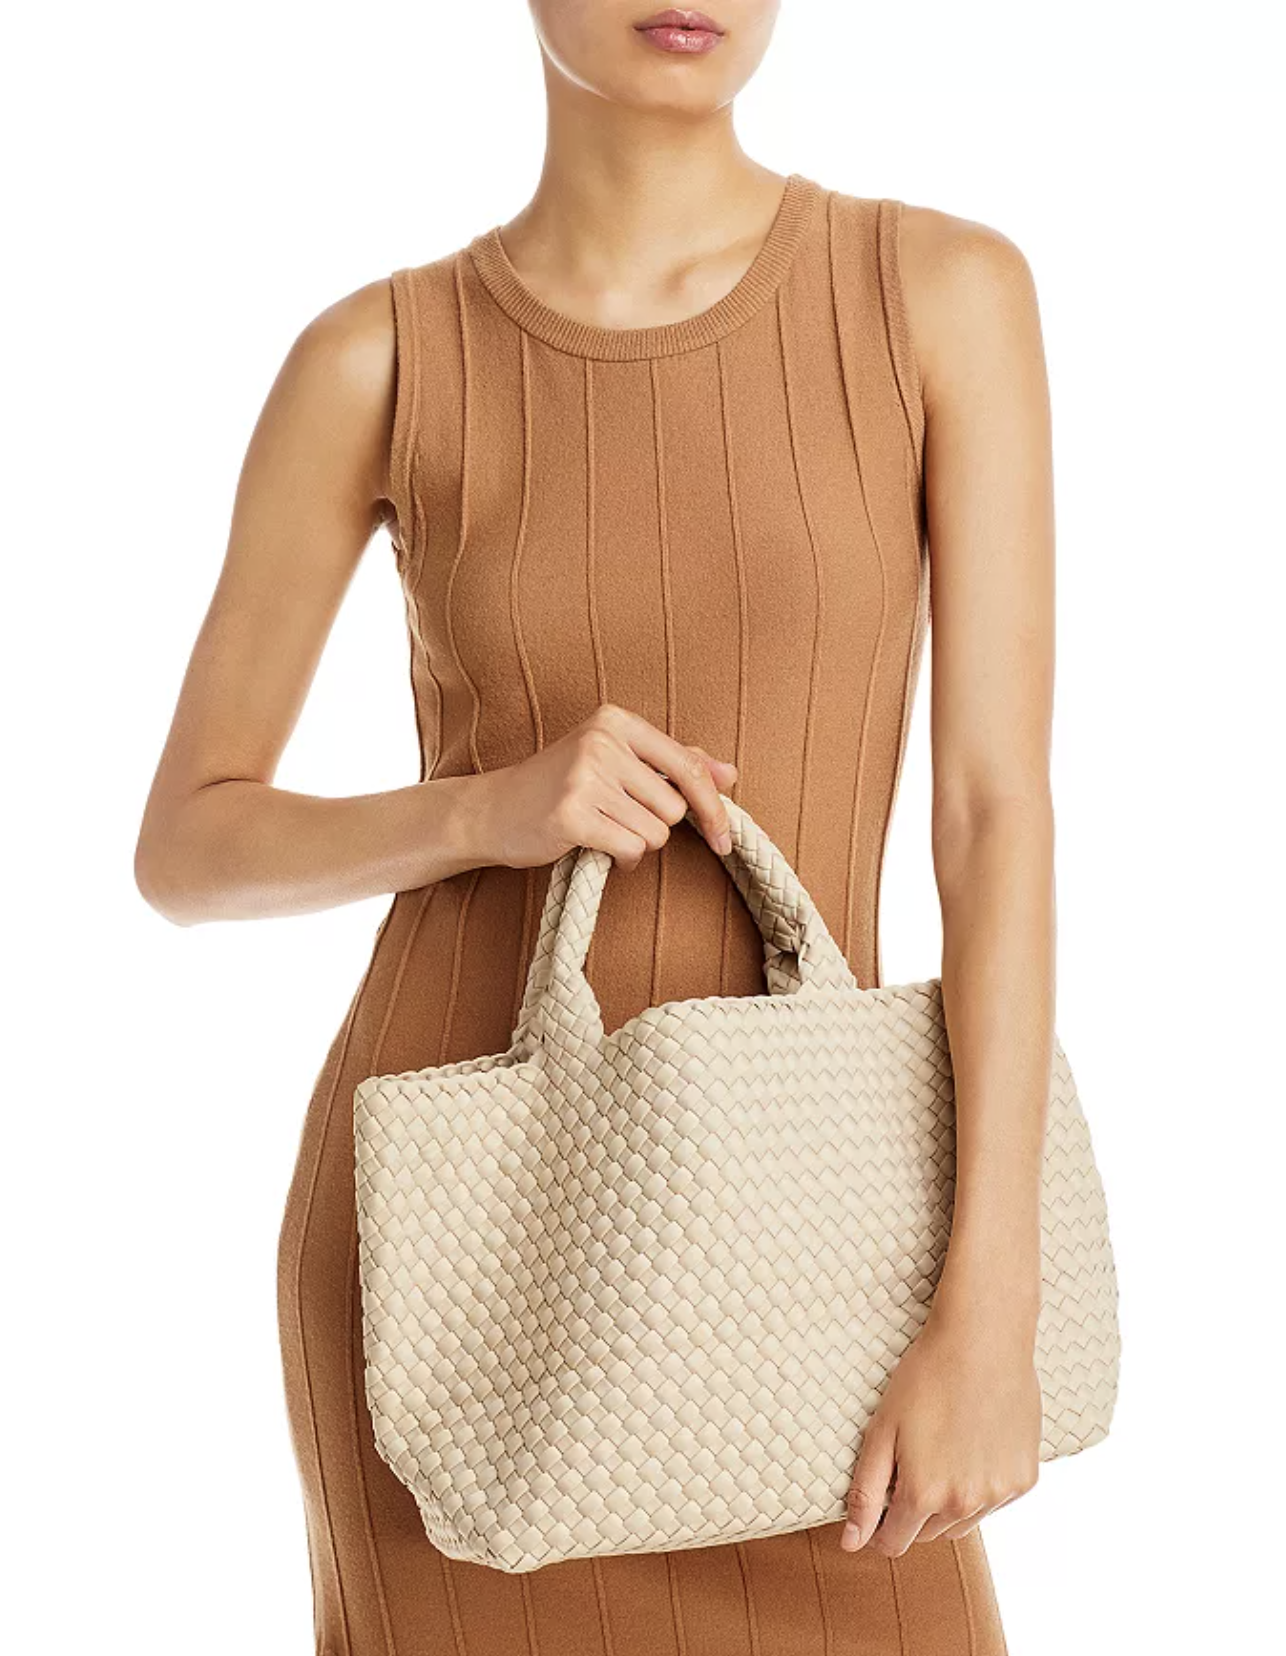 favorite 2023 spring accessory trend: woven totes and structured straw bags